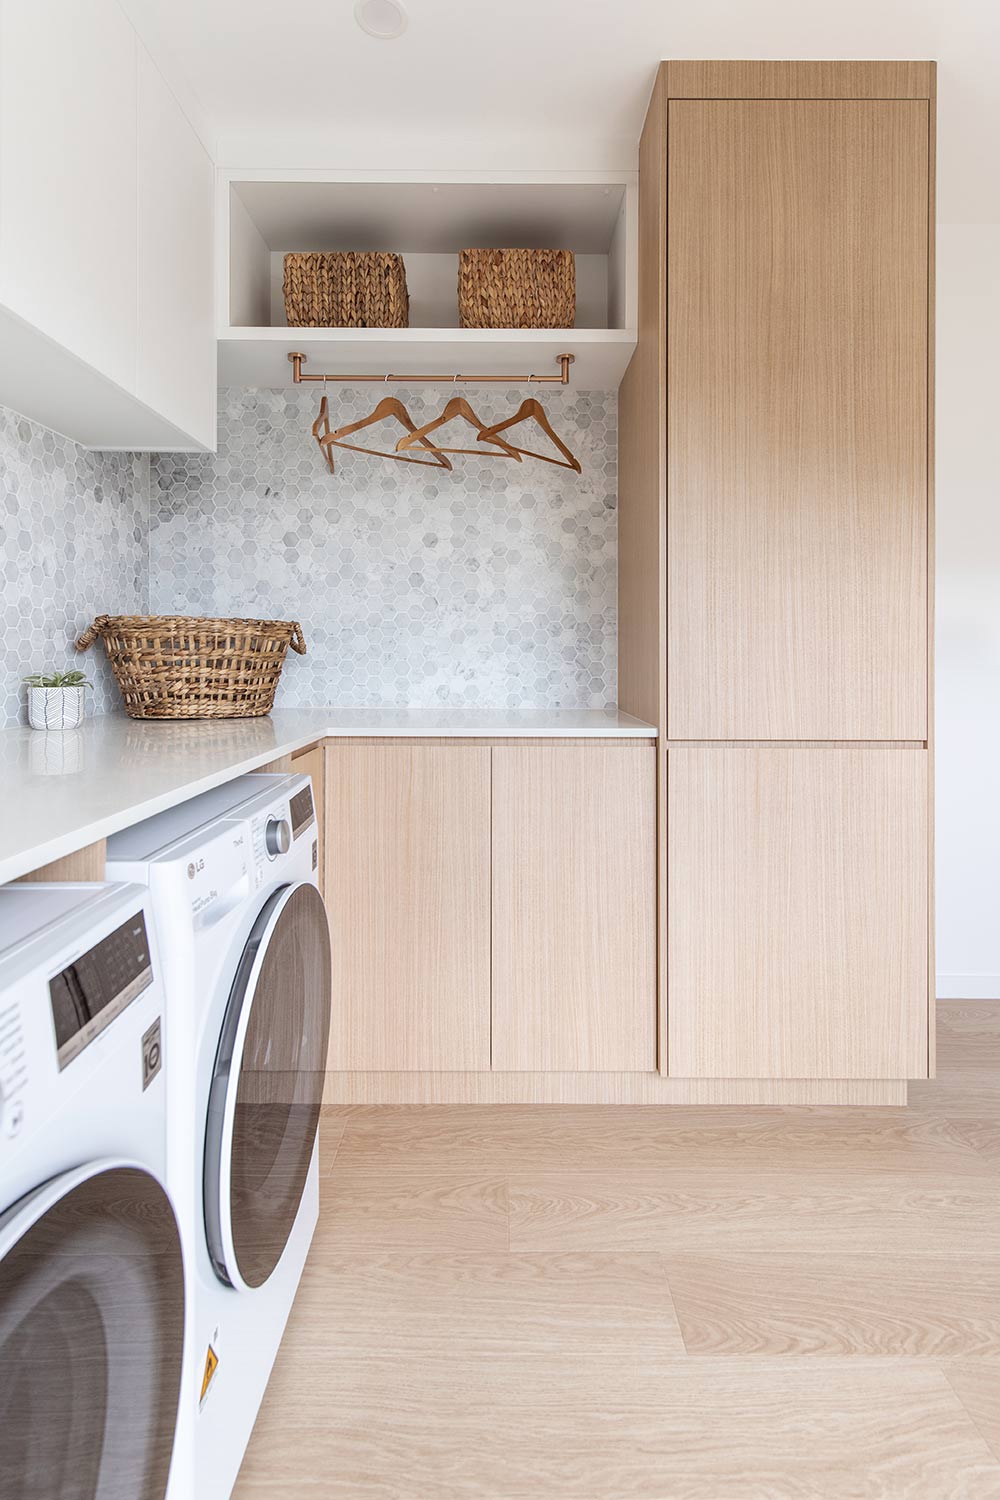 7 laundry room ideas that are practical yet beautiful | abi interiors